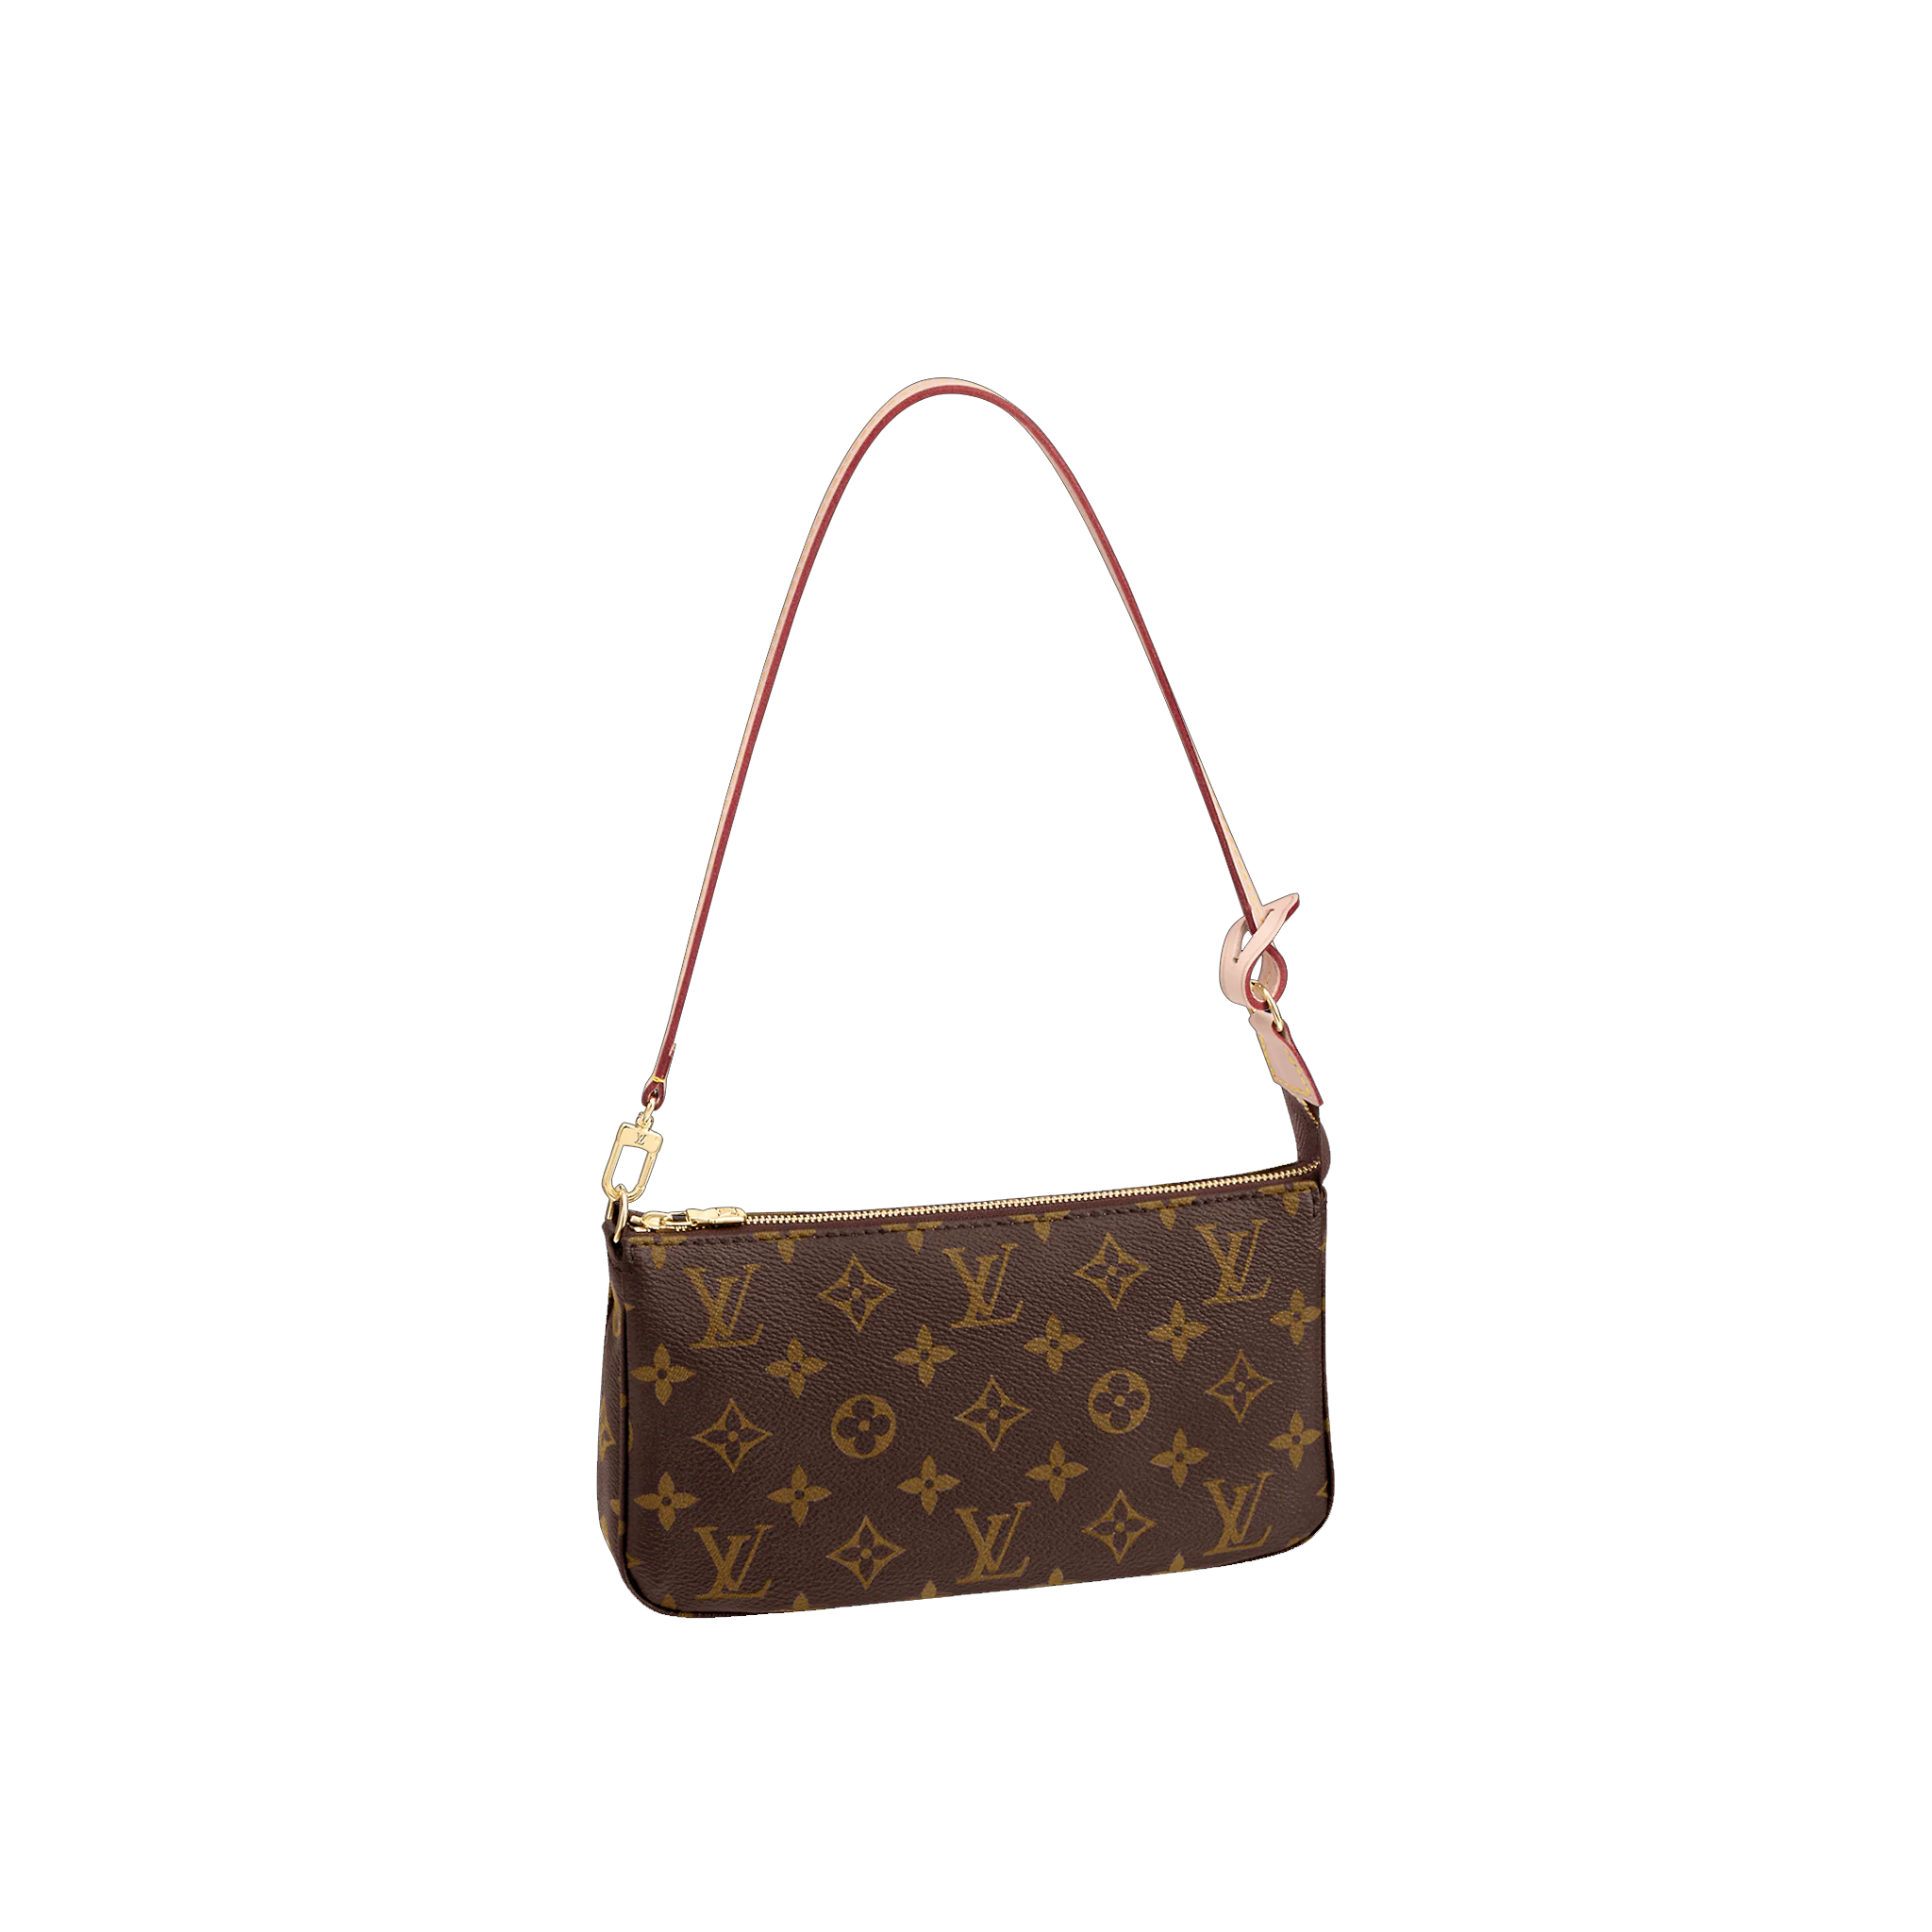 12 Louis Vuitton Bags Every Bag Lover Should Know - luxfy